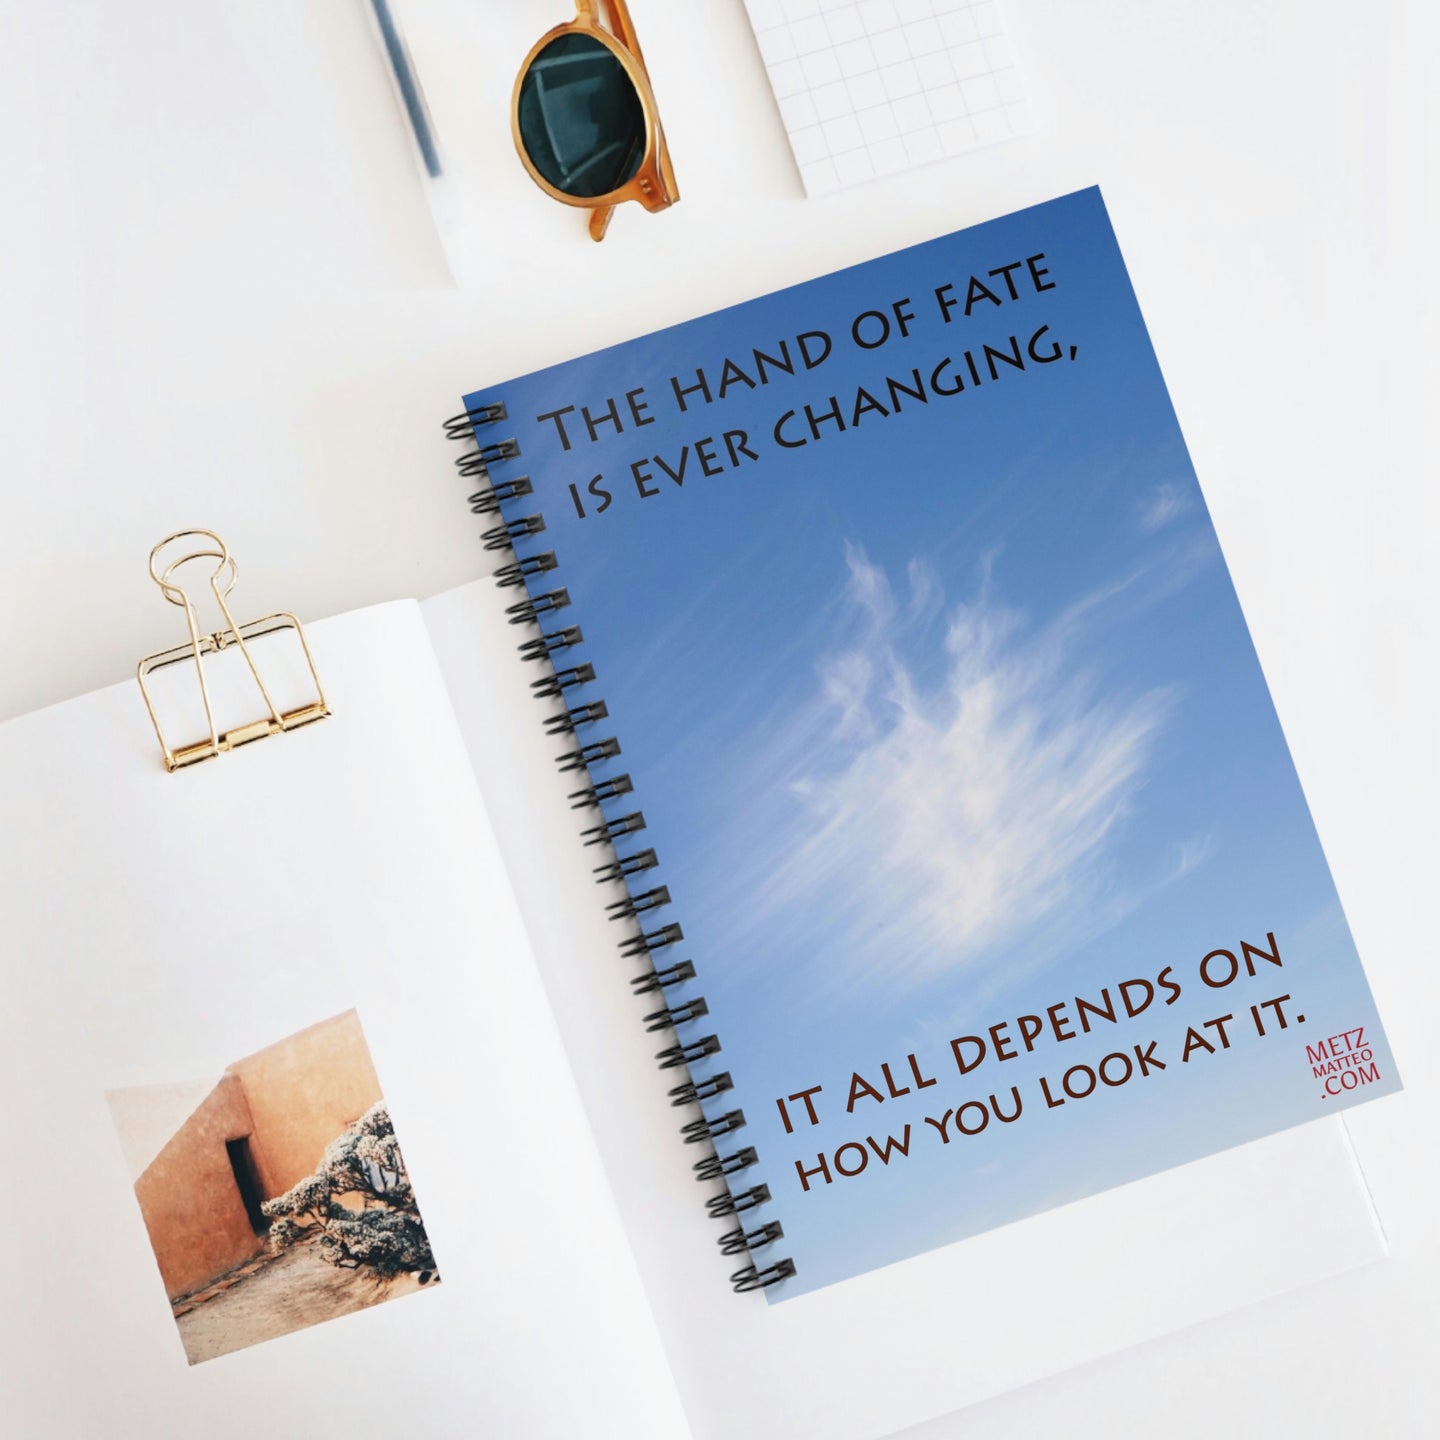 The hand of fate is ever changing... | Inspirational Motivational Quote Spiral Notebook | Ruled Line | Cloud White Sky Blue